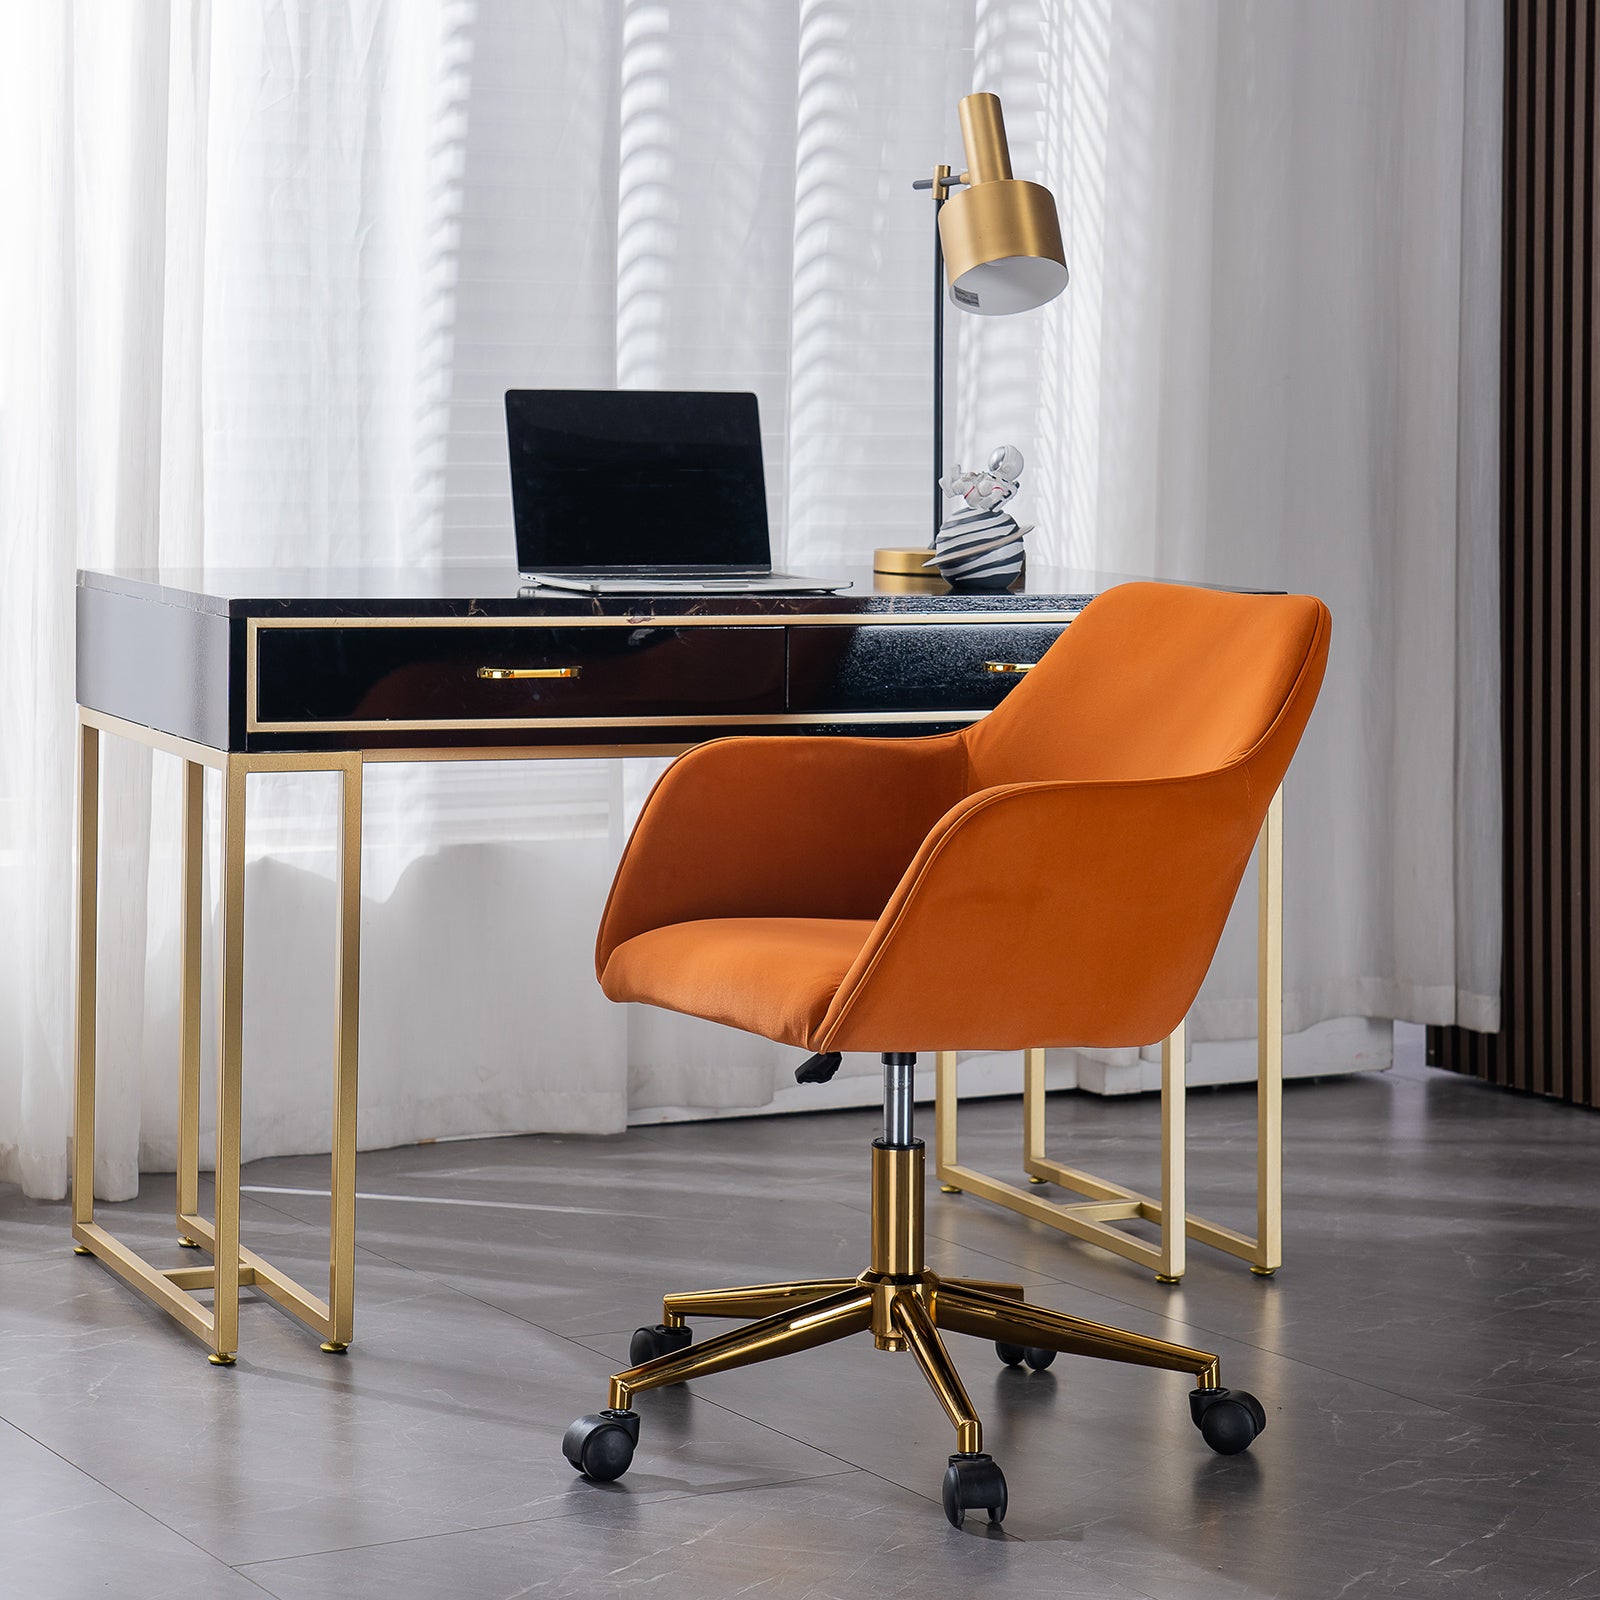 Modern Velvet Fabric Material Adjustable Height 360 revolving Home Office Chair with Gold Metal Legs and Universal Wheels for Indoor; Orange